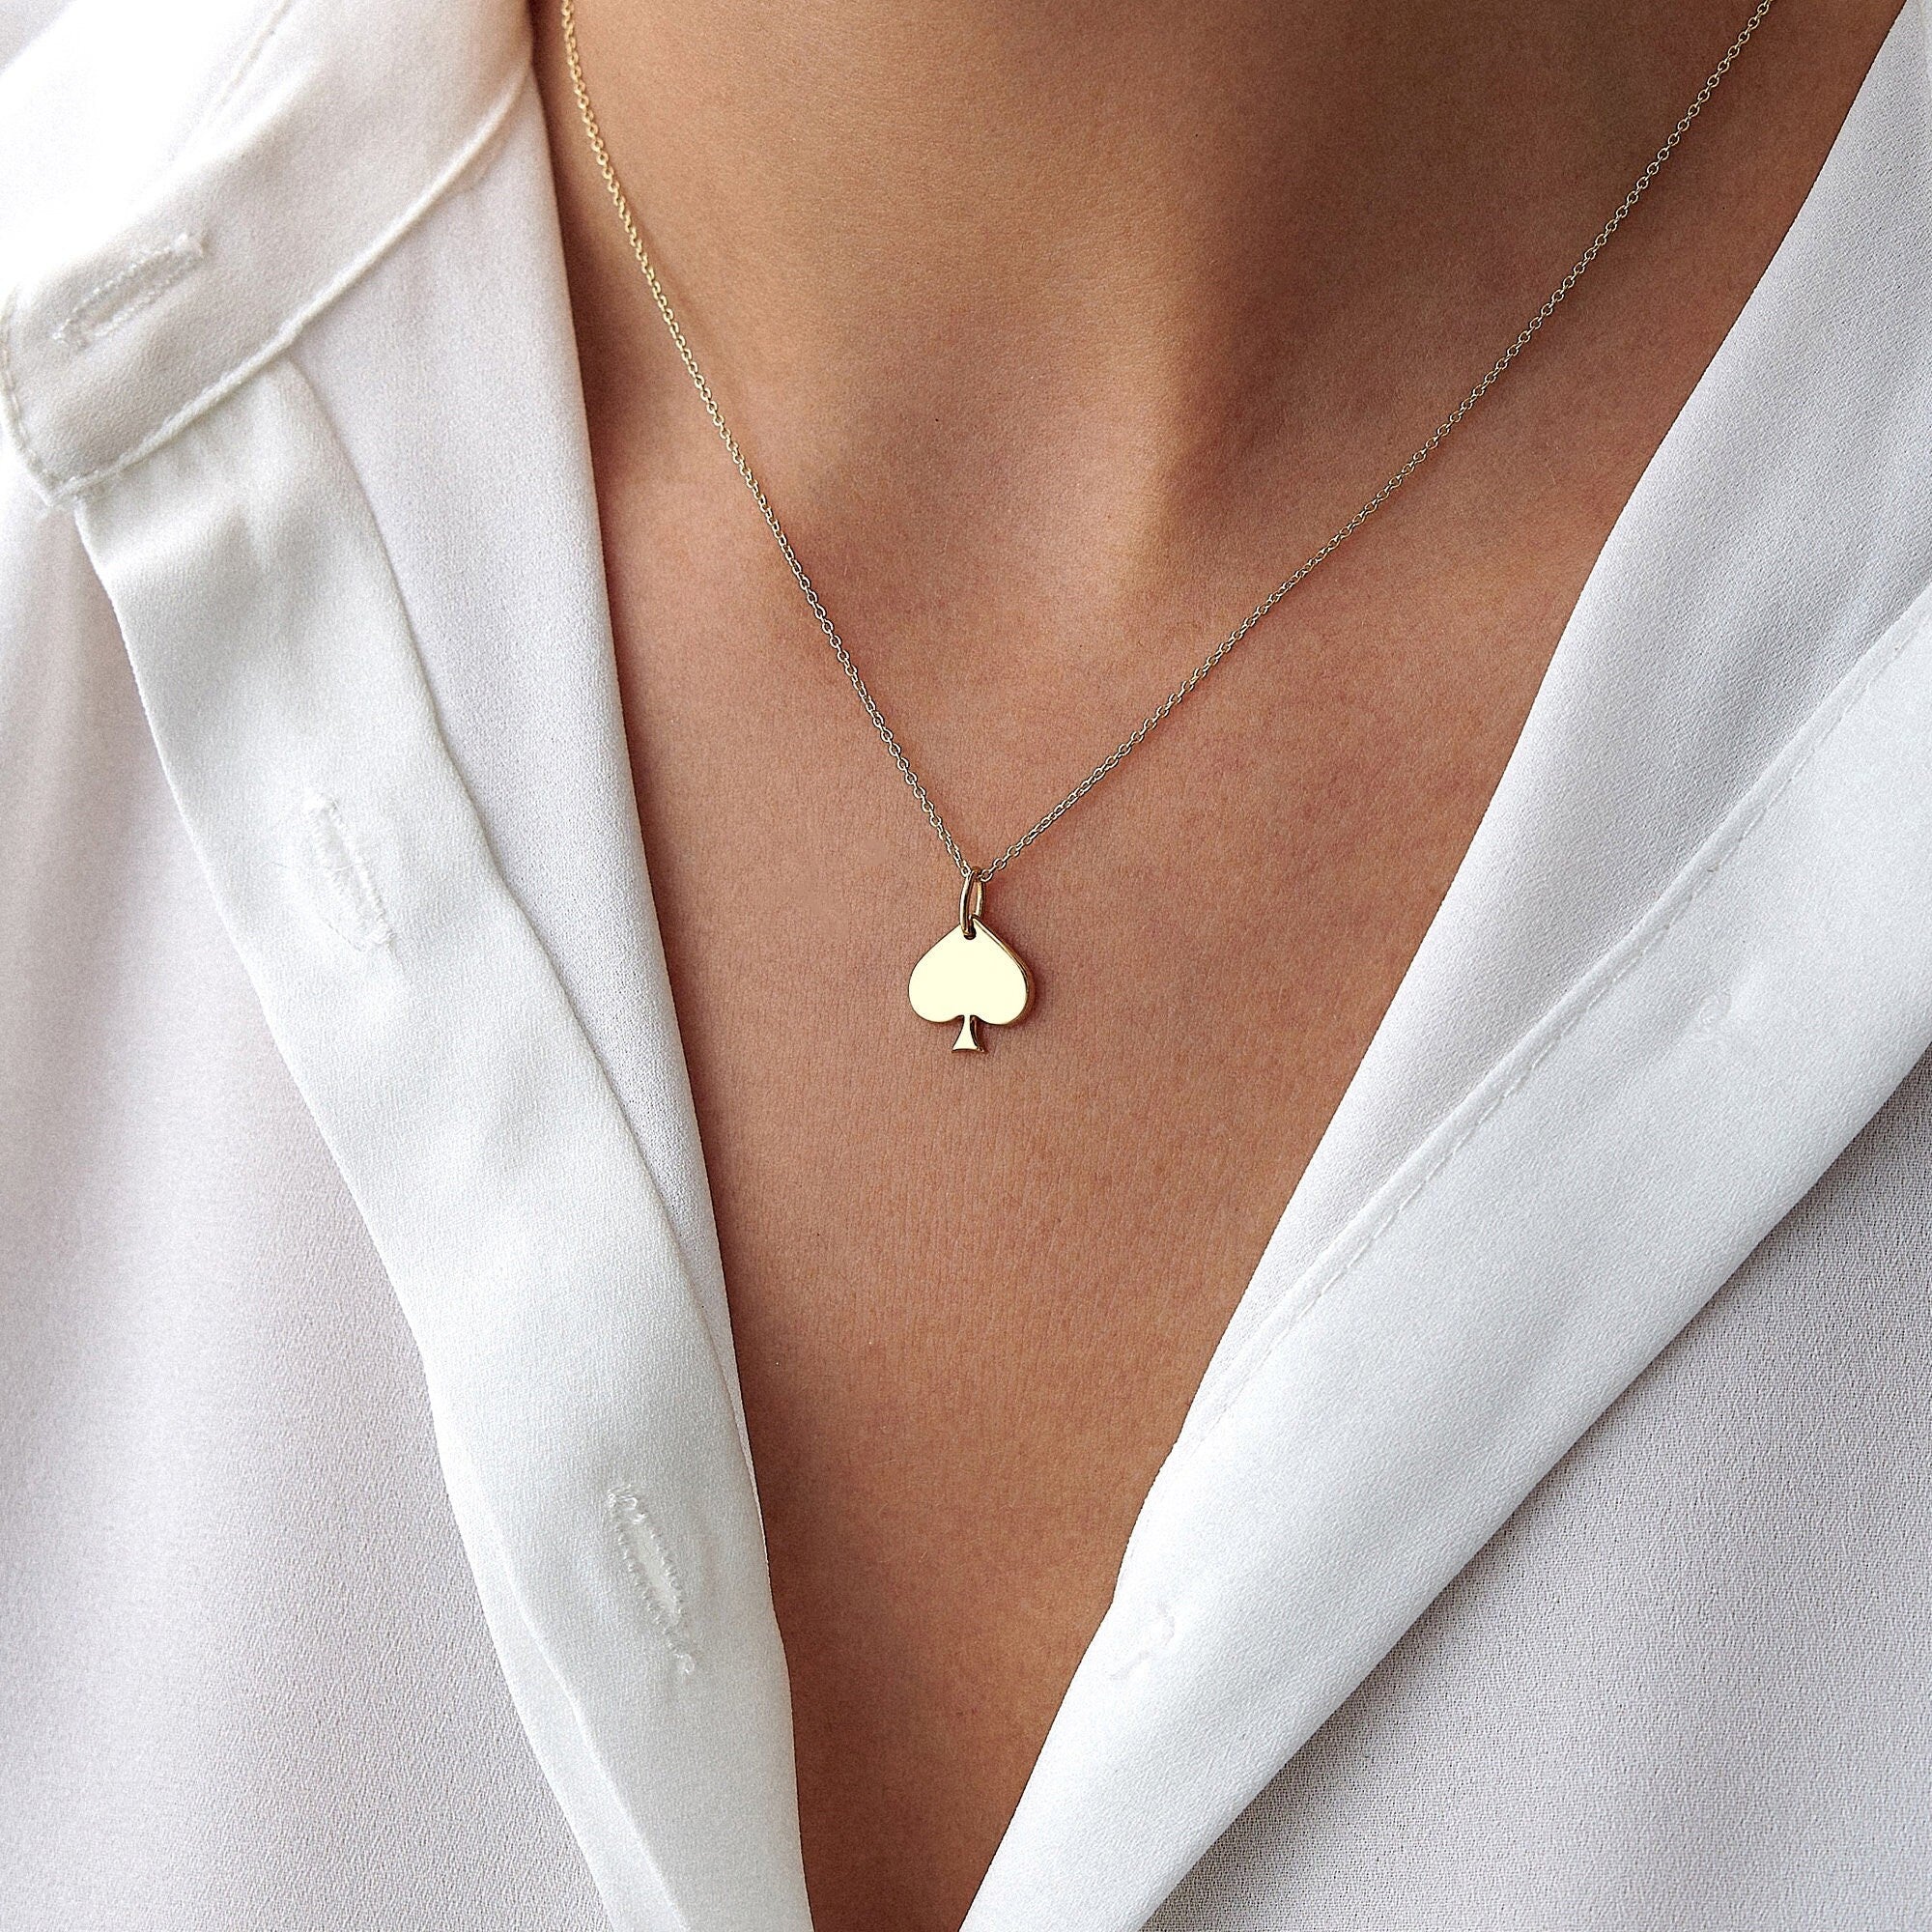 Ace Of Spades Pendant Necklace Available in 14K and 18K Gold